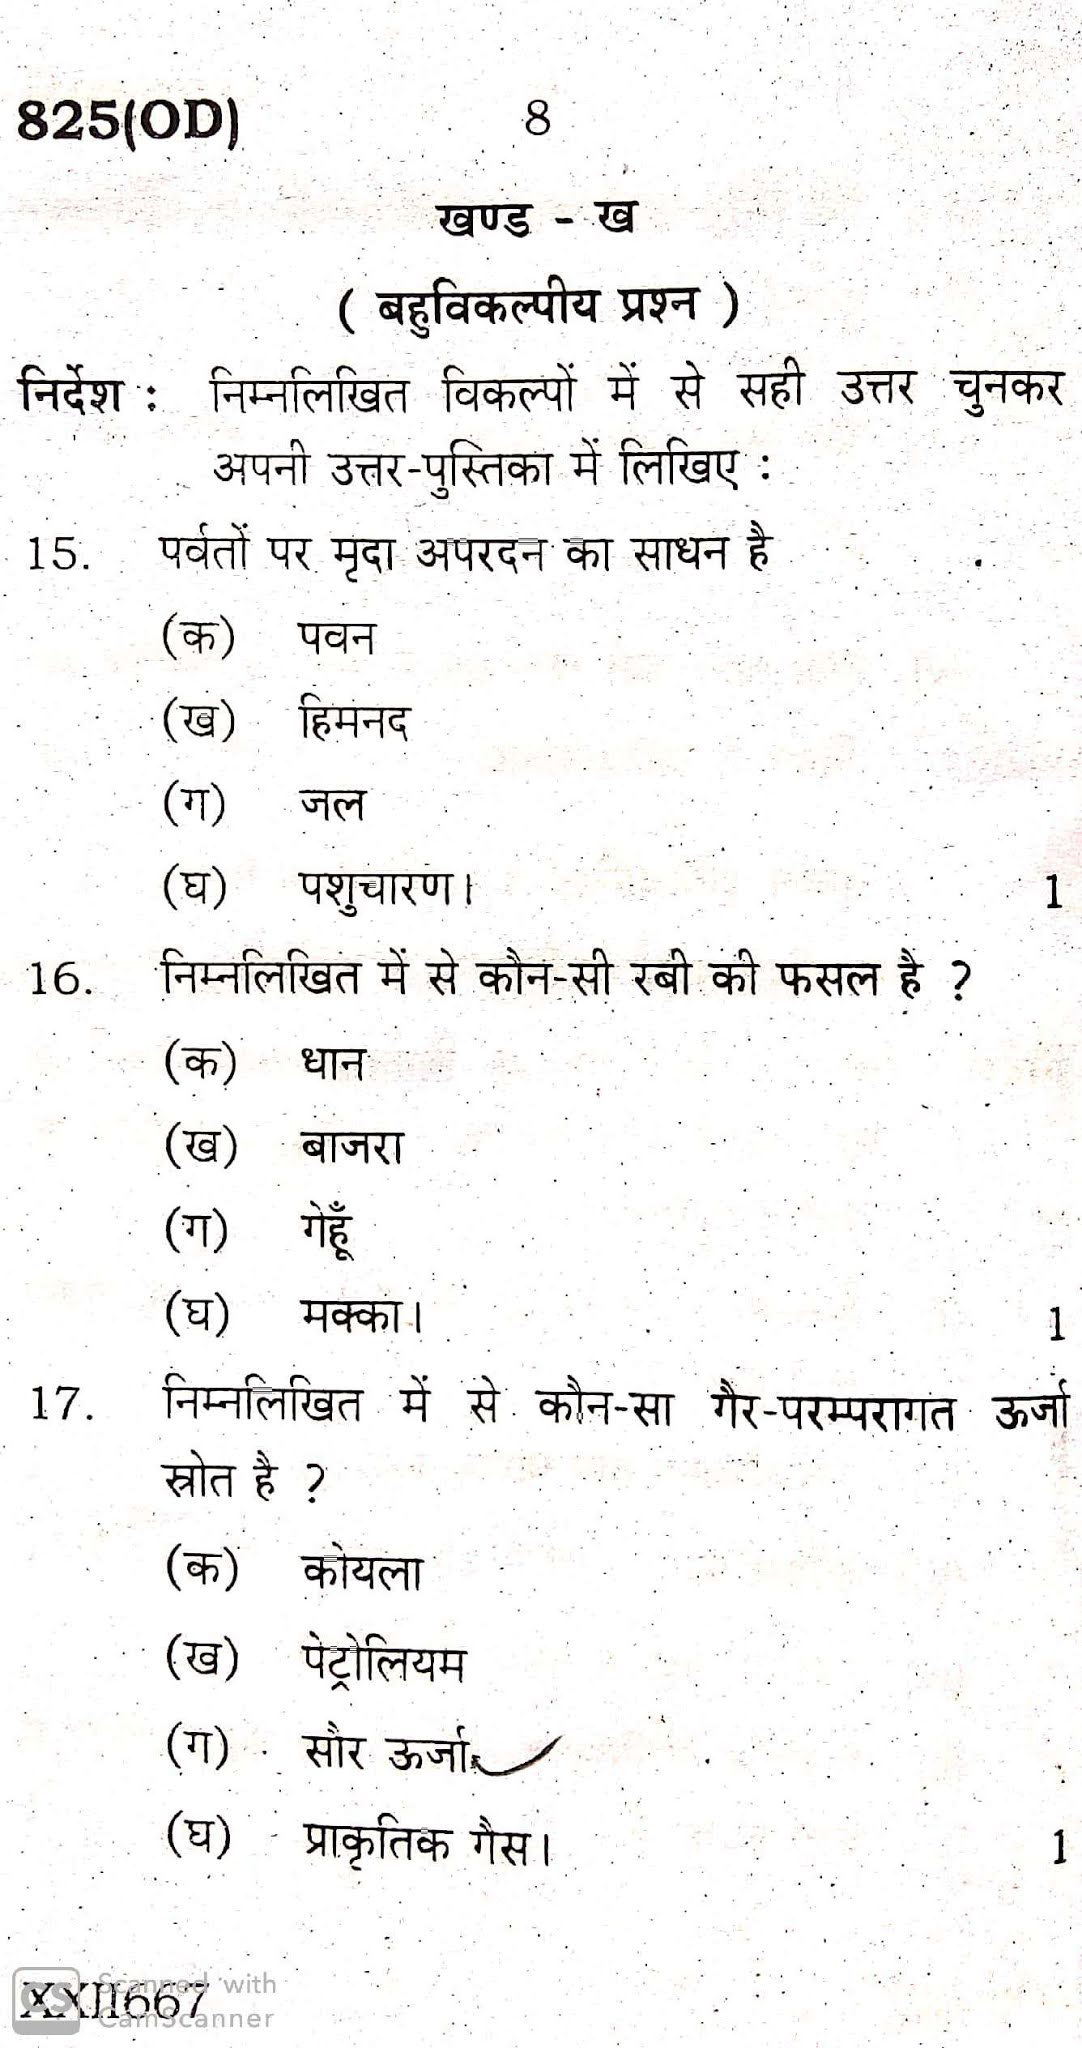 Social Science, UP Board question paper for 10th (High School), 2020 Examination